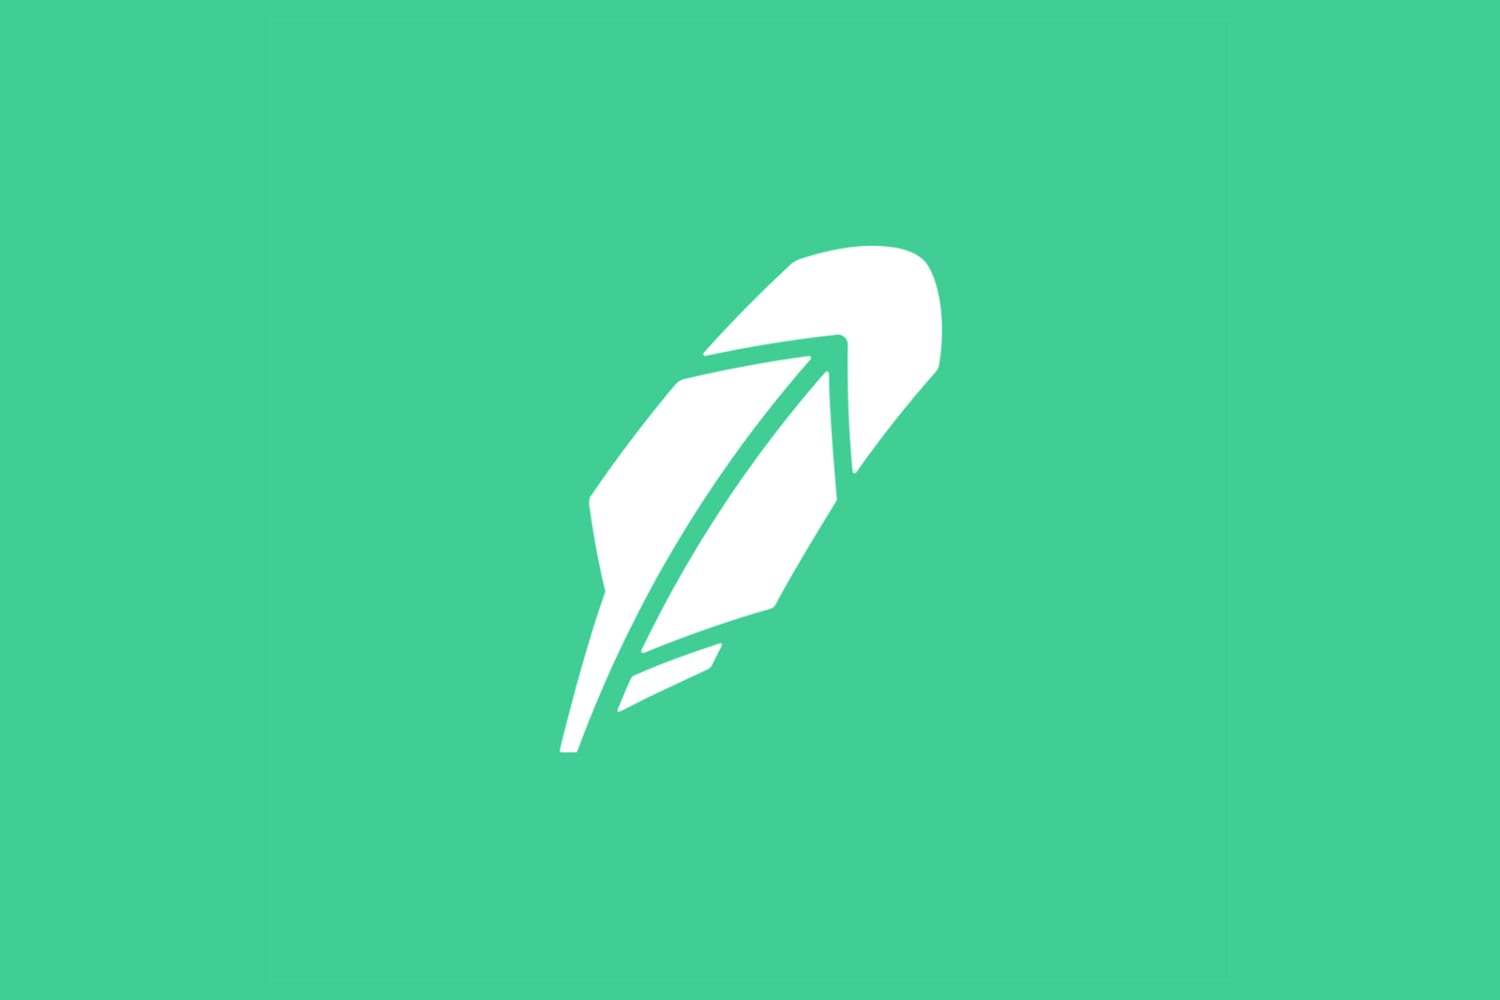 Commission-Free Investing Robinhood Pictures